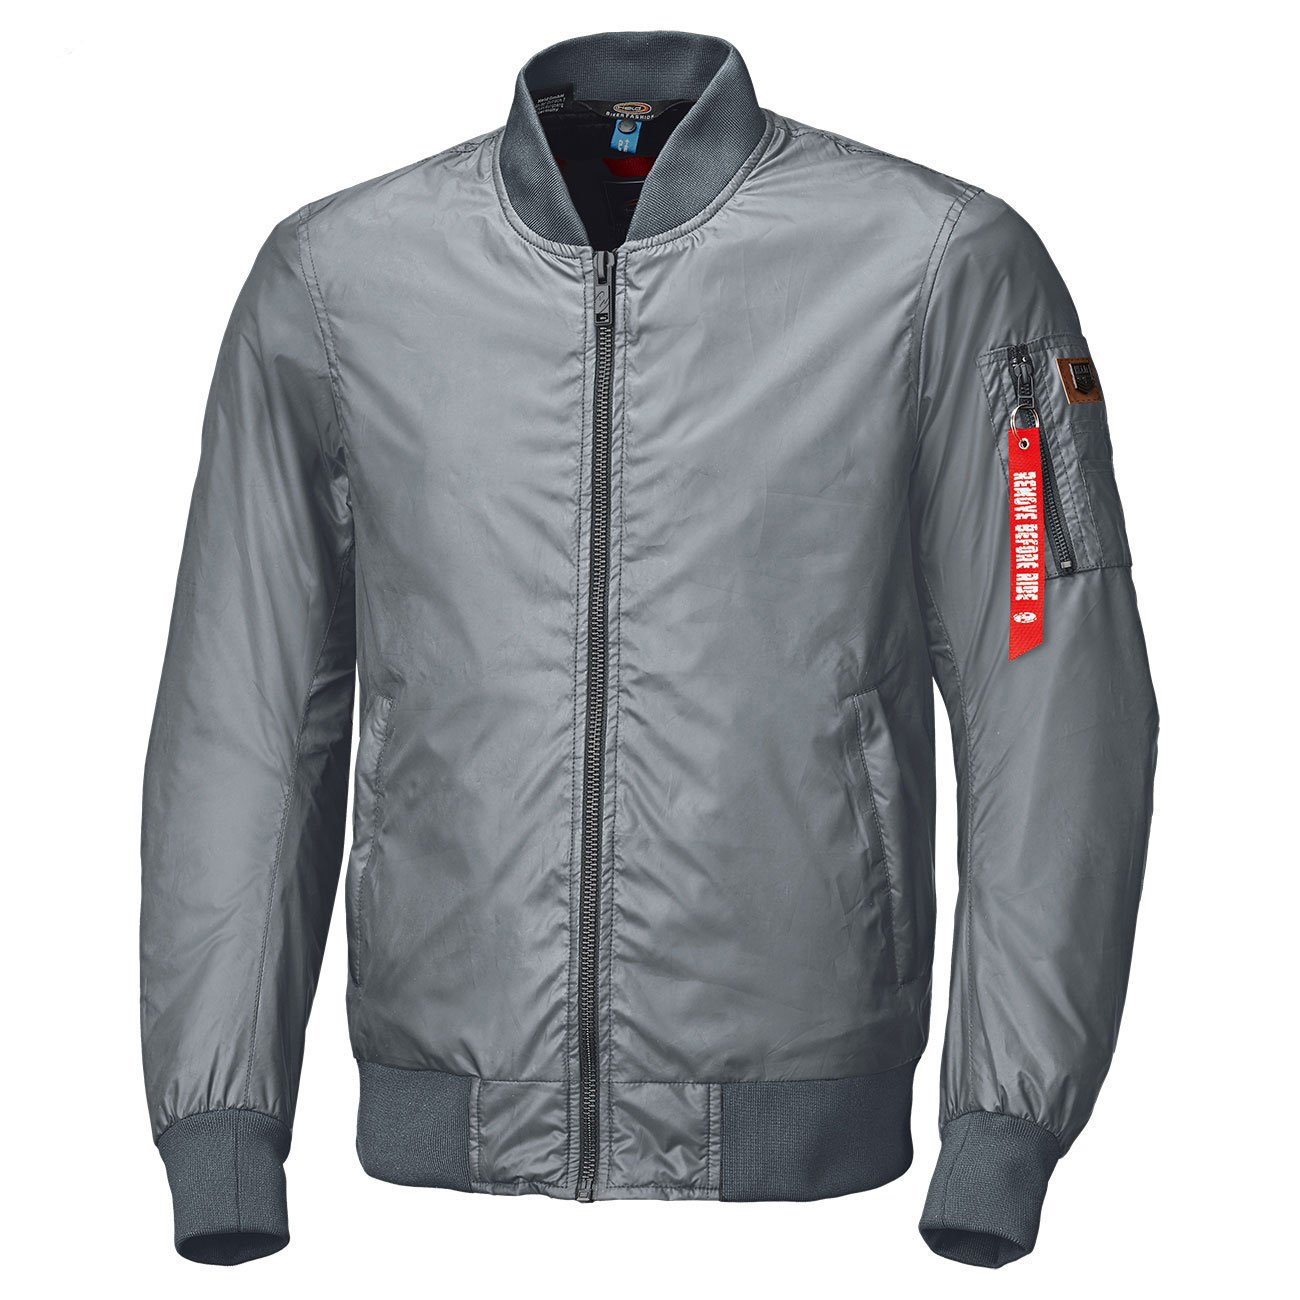 Image of Held Palermo Jacket Gray Size 3XL ID 4049462911857